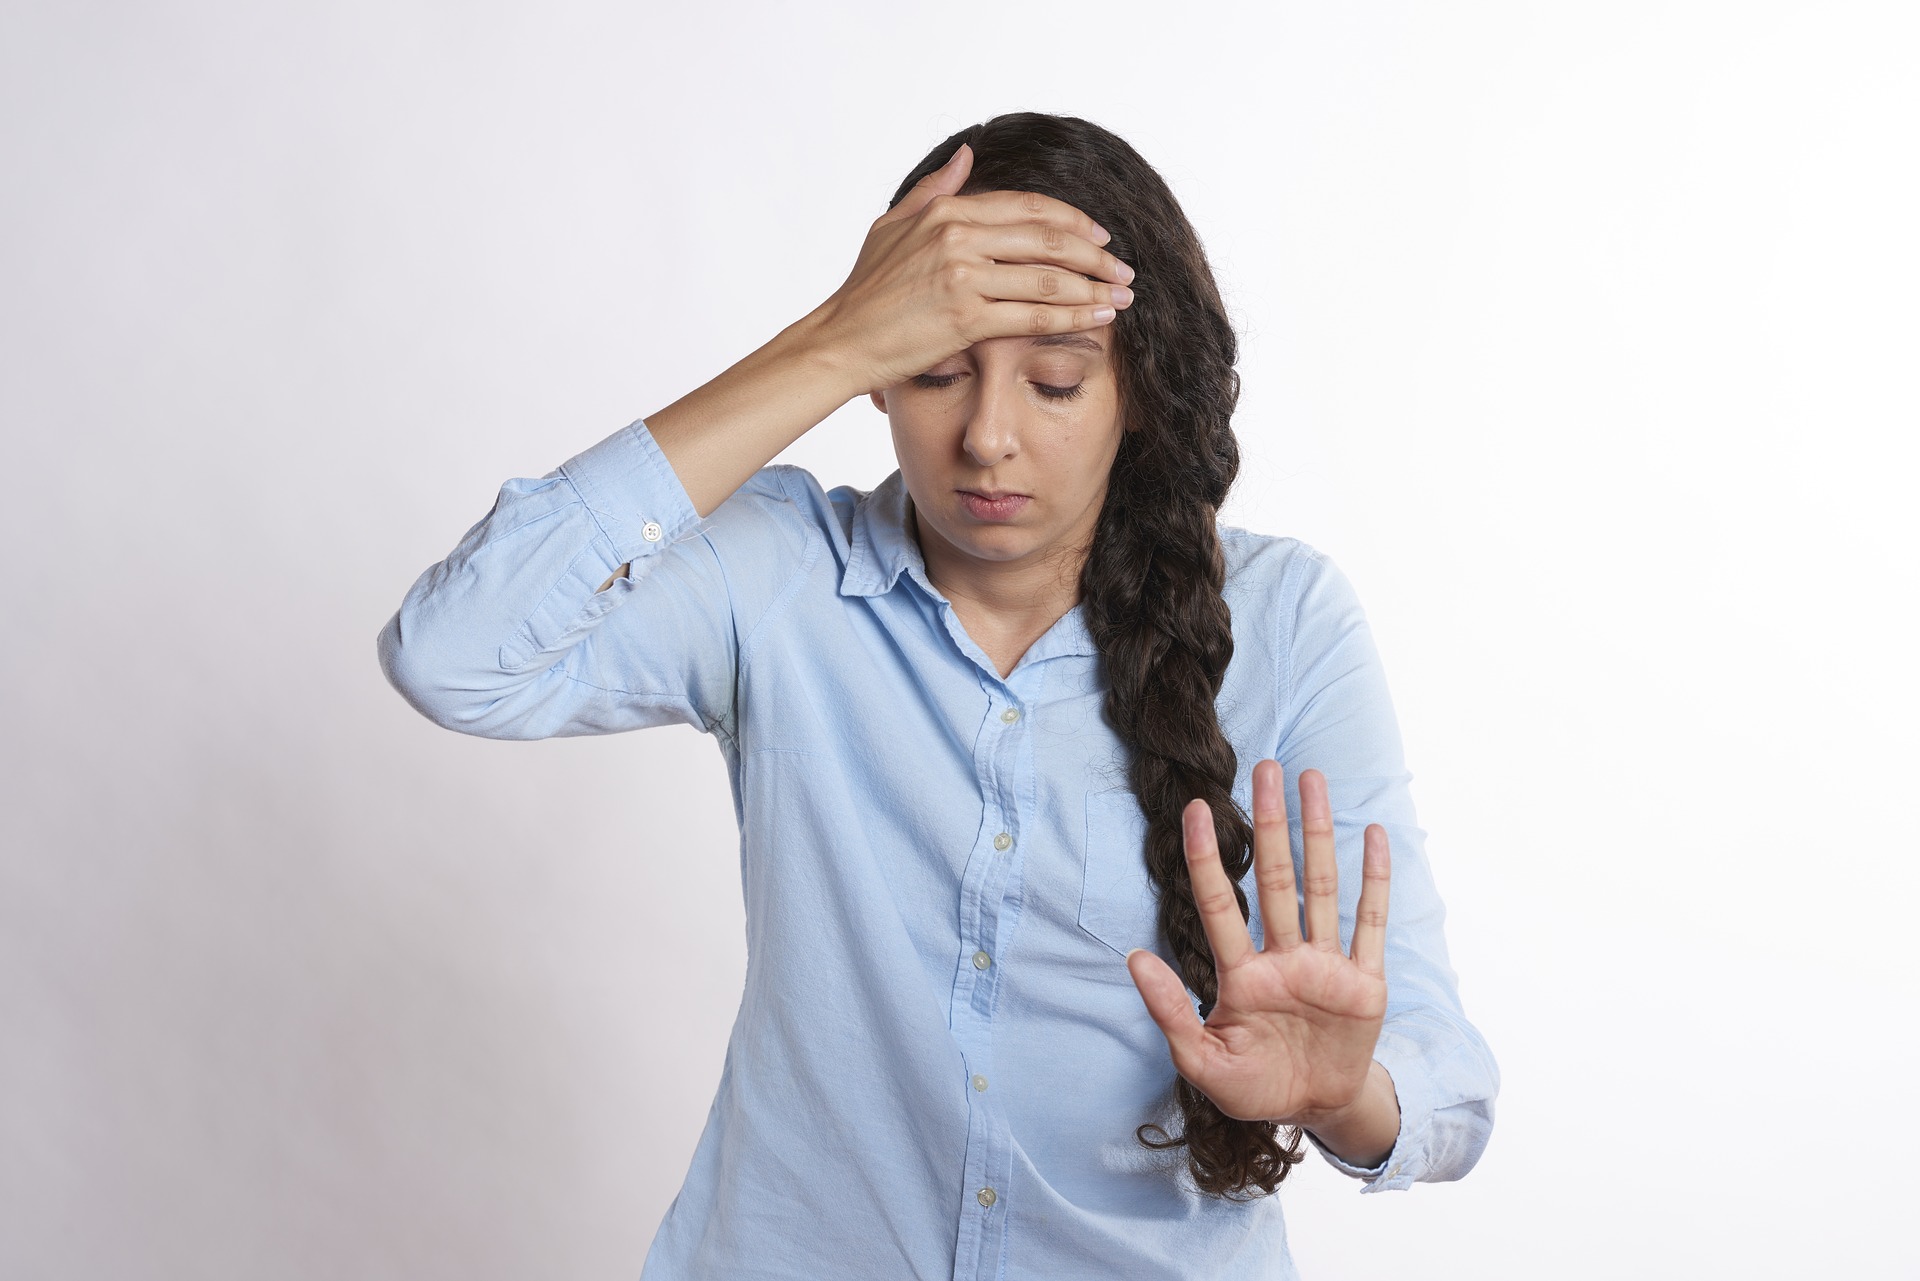 signs of a bad attorney - stressed woman